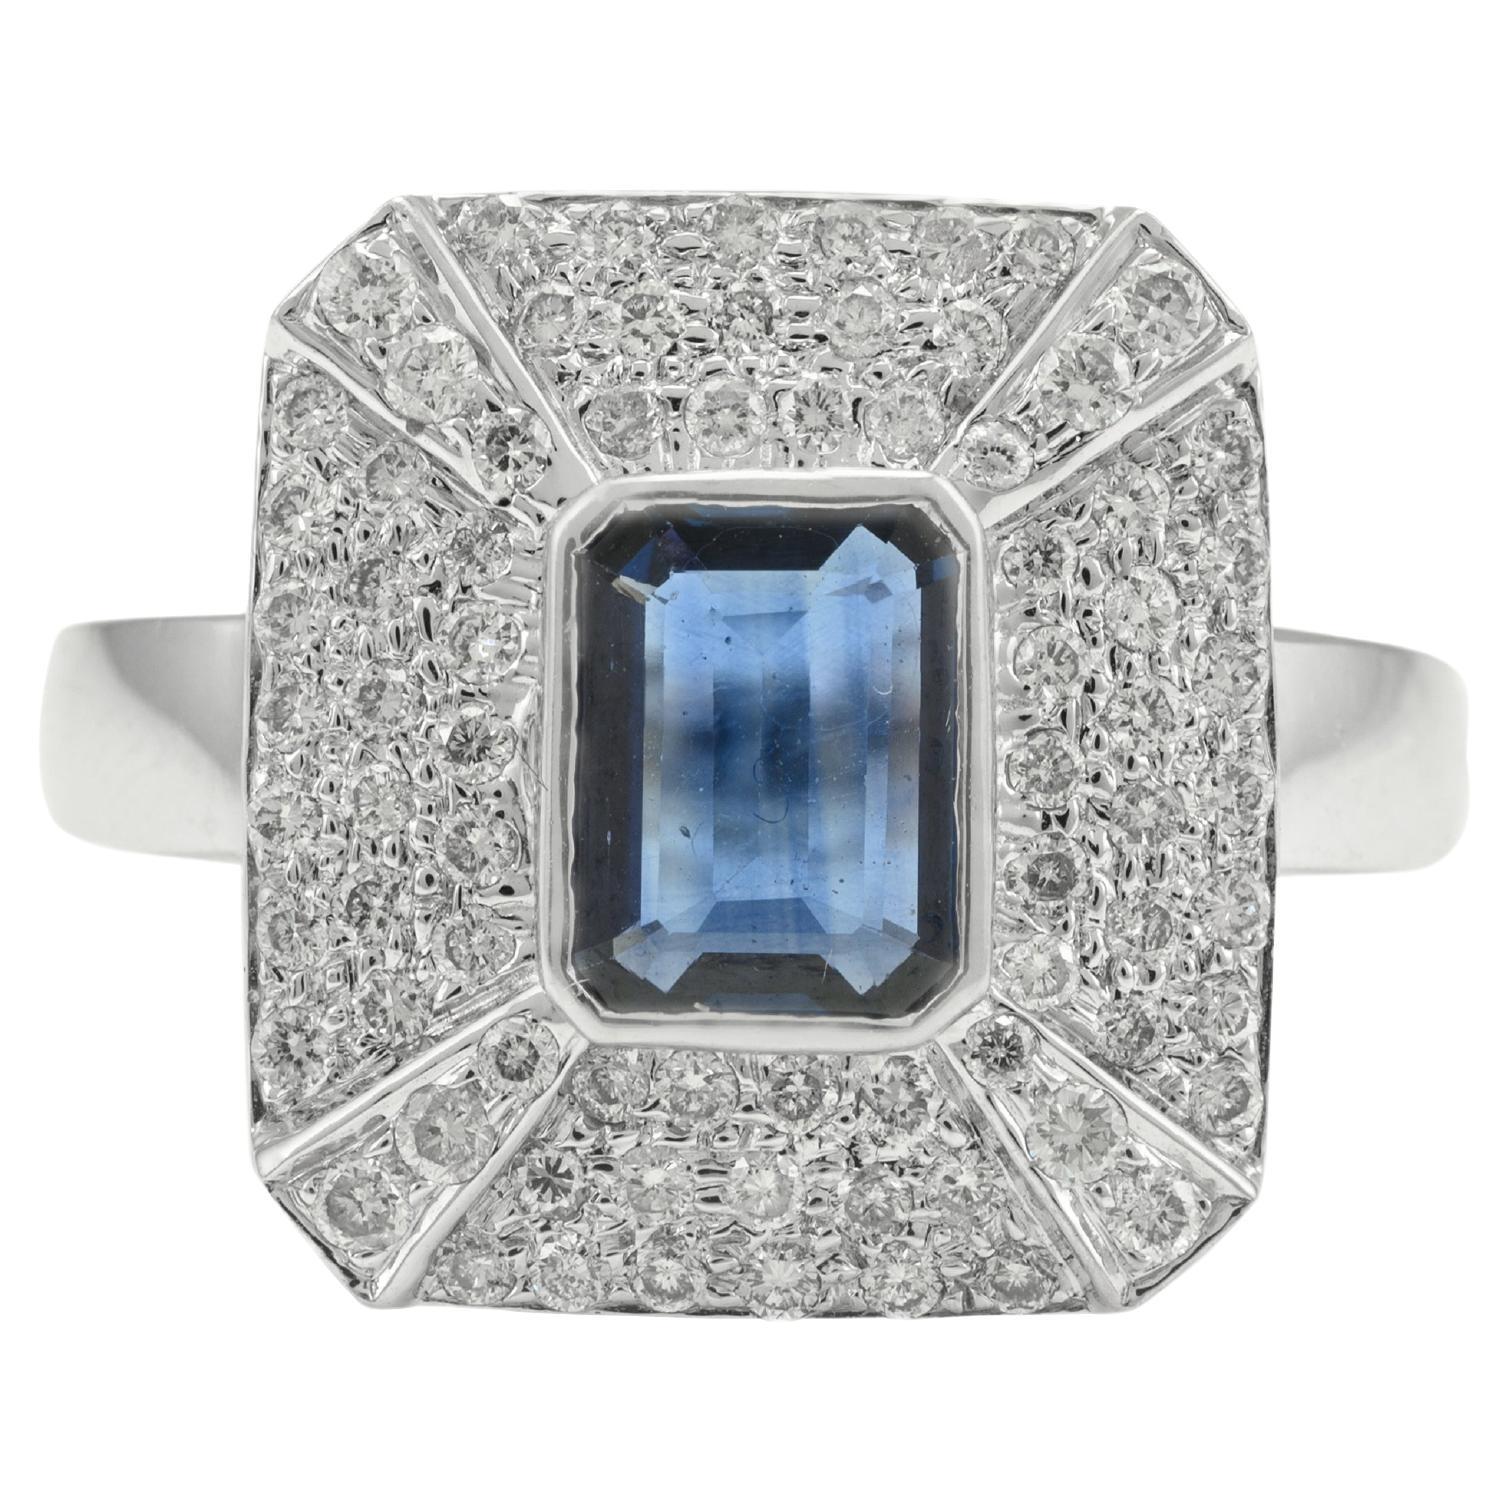 Exquisite Diamond and Emerald Cut Blue Sapphire Ring in 18k Solid White Gold